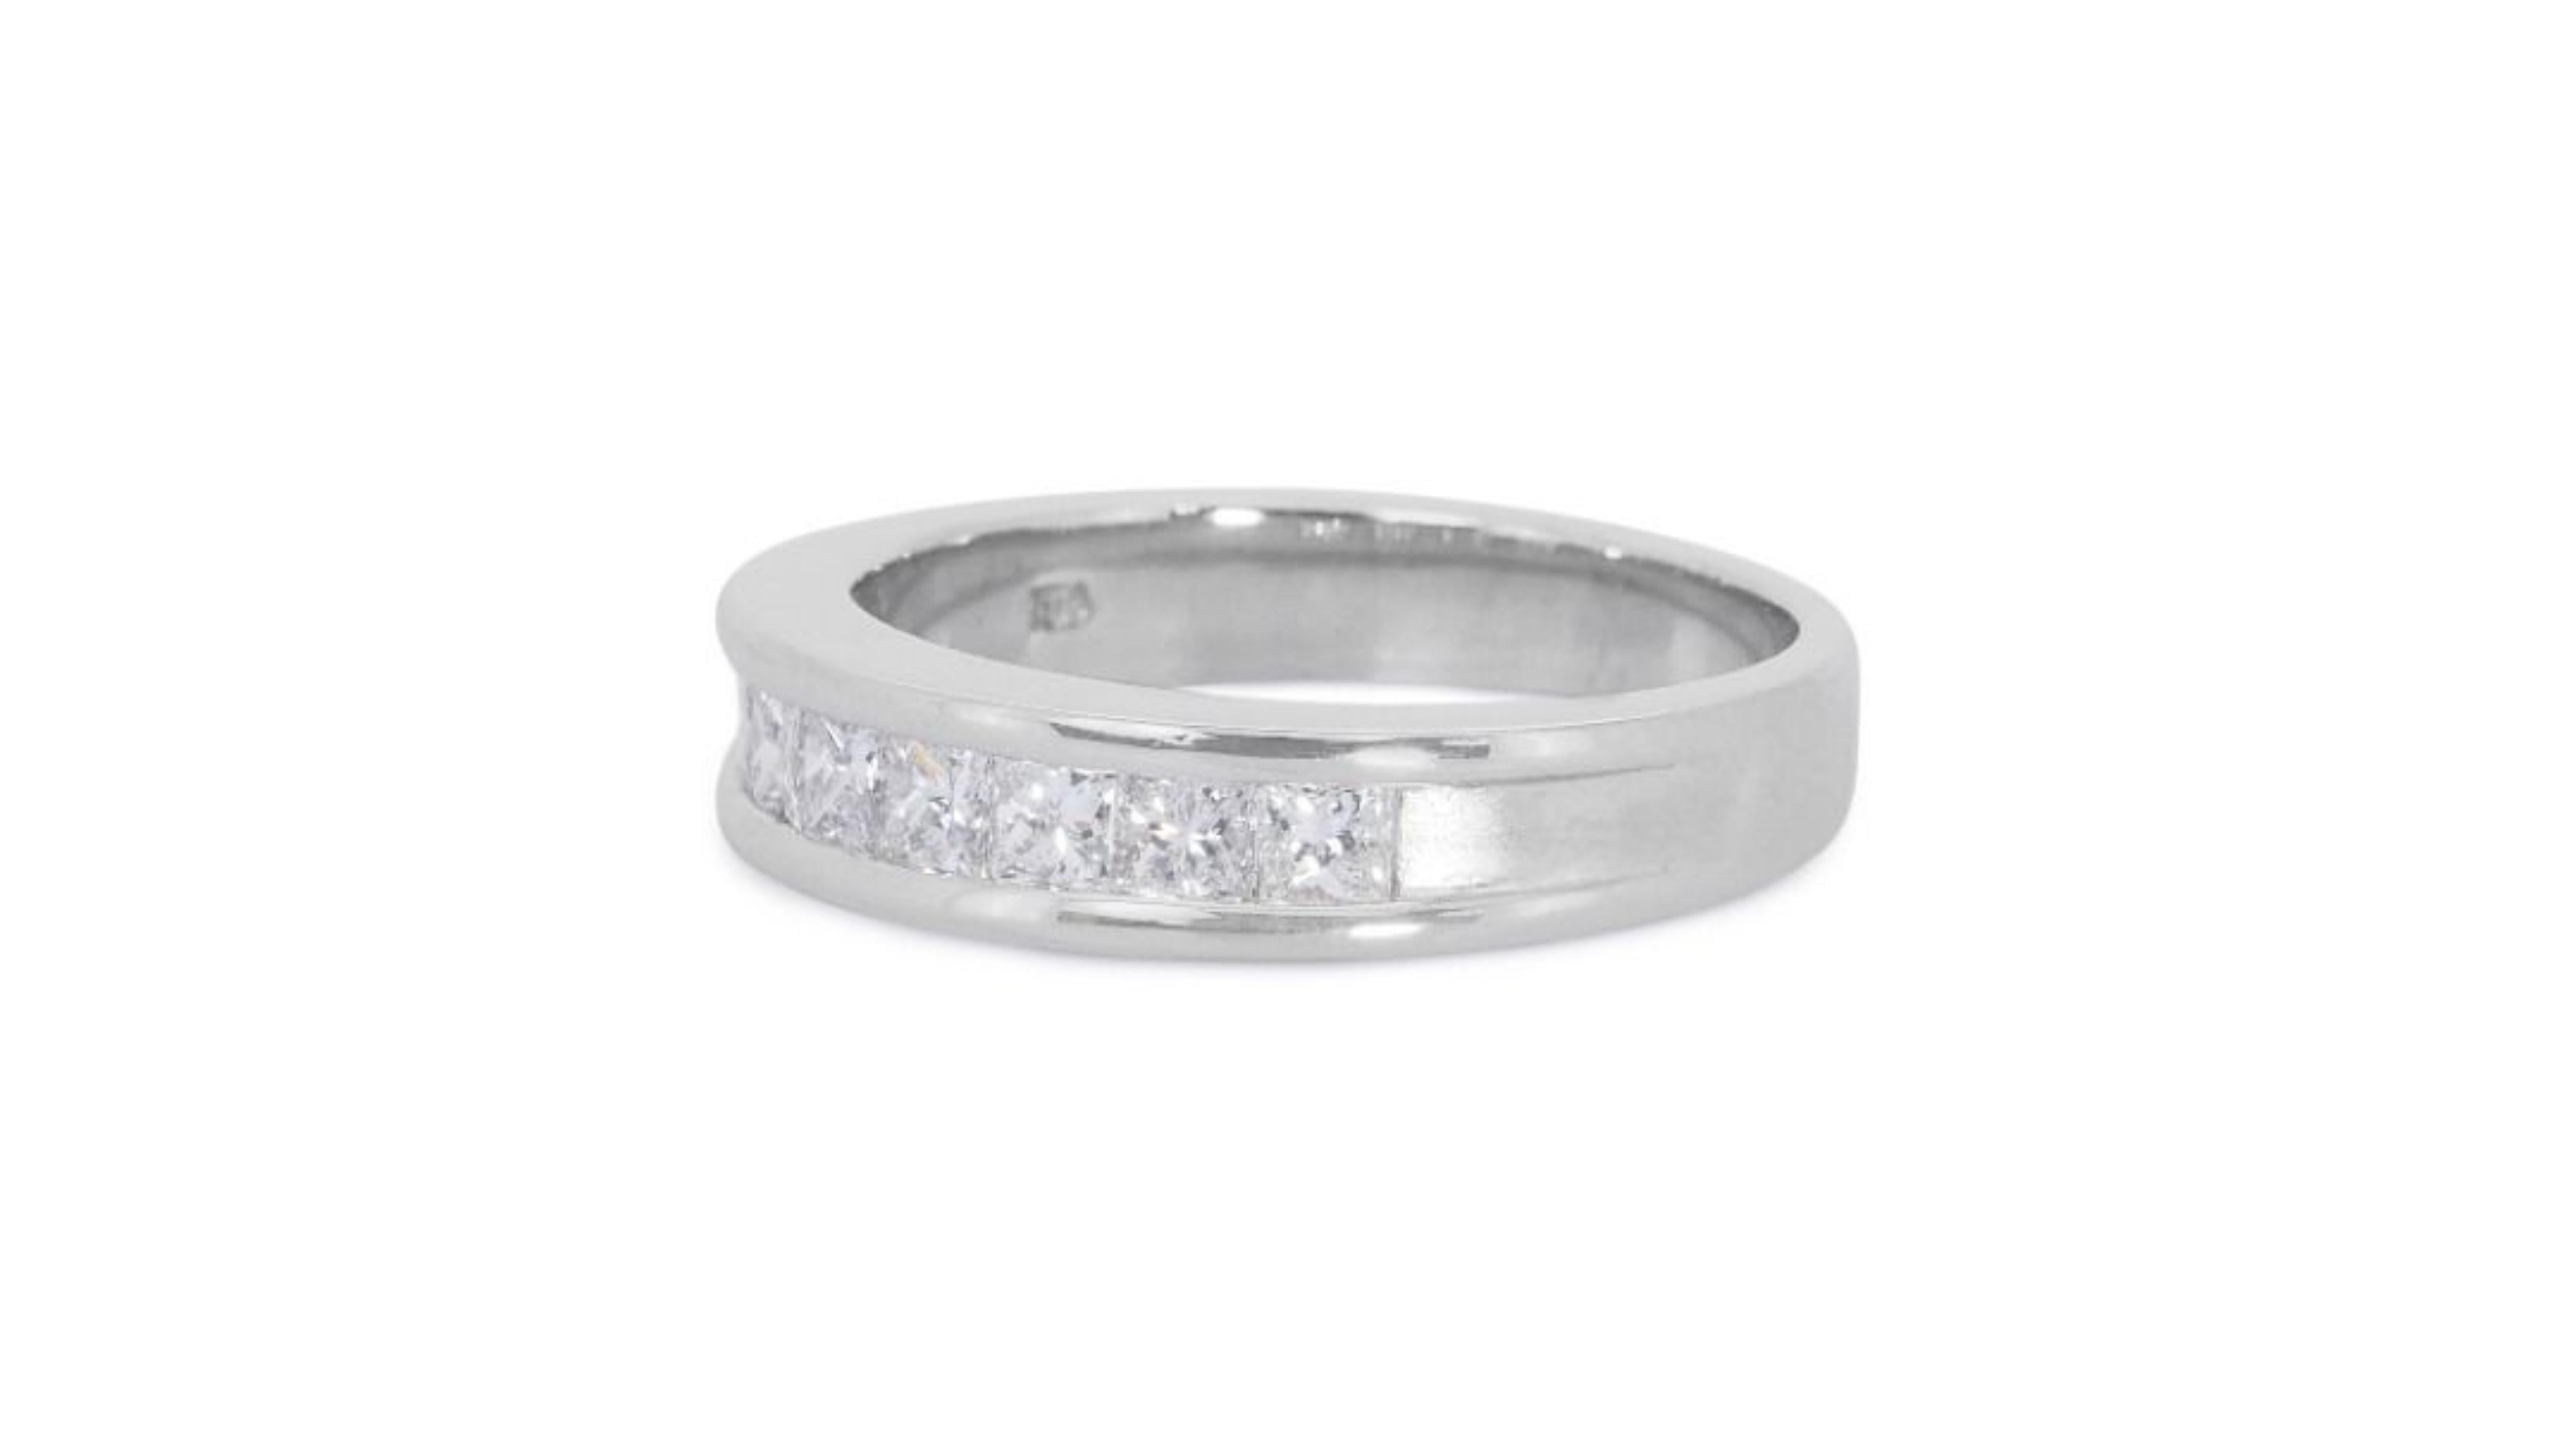 Women's Marvelous 18k White Gold Ring with 1.05ct. Princess Diamond Pave For Sale